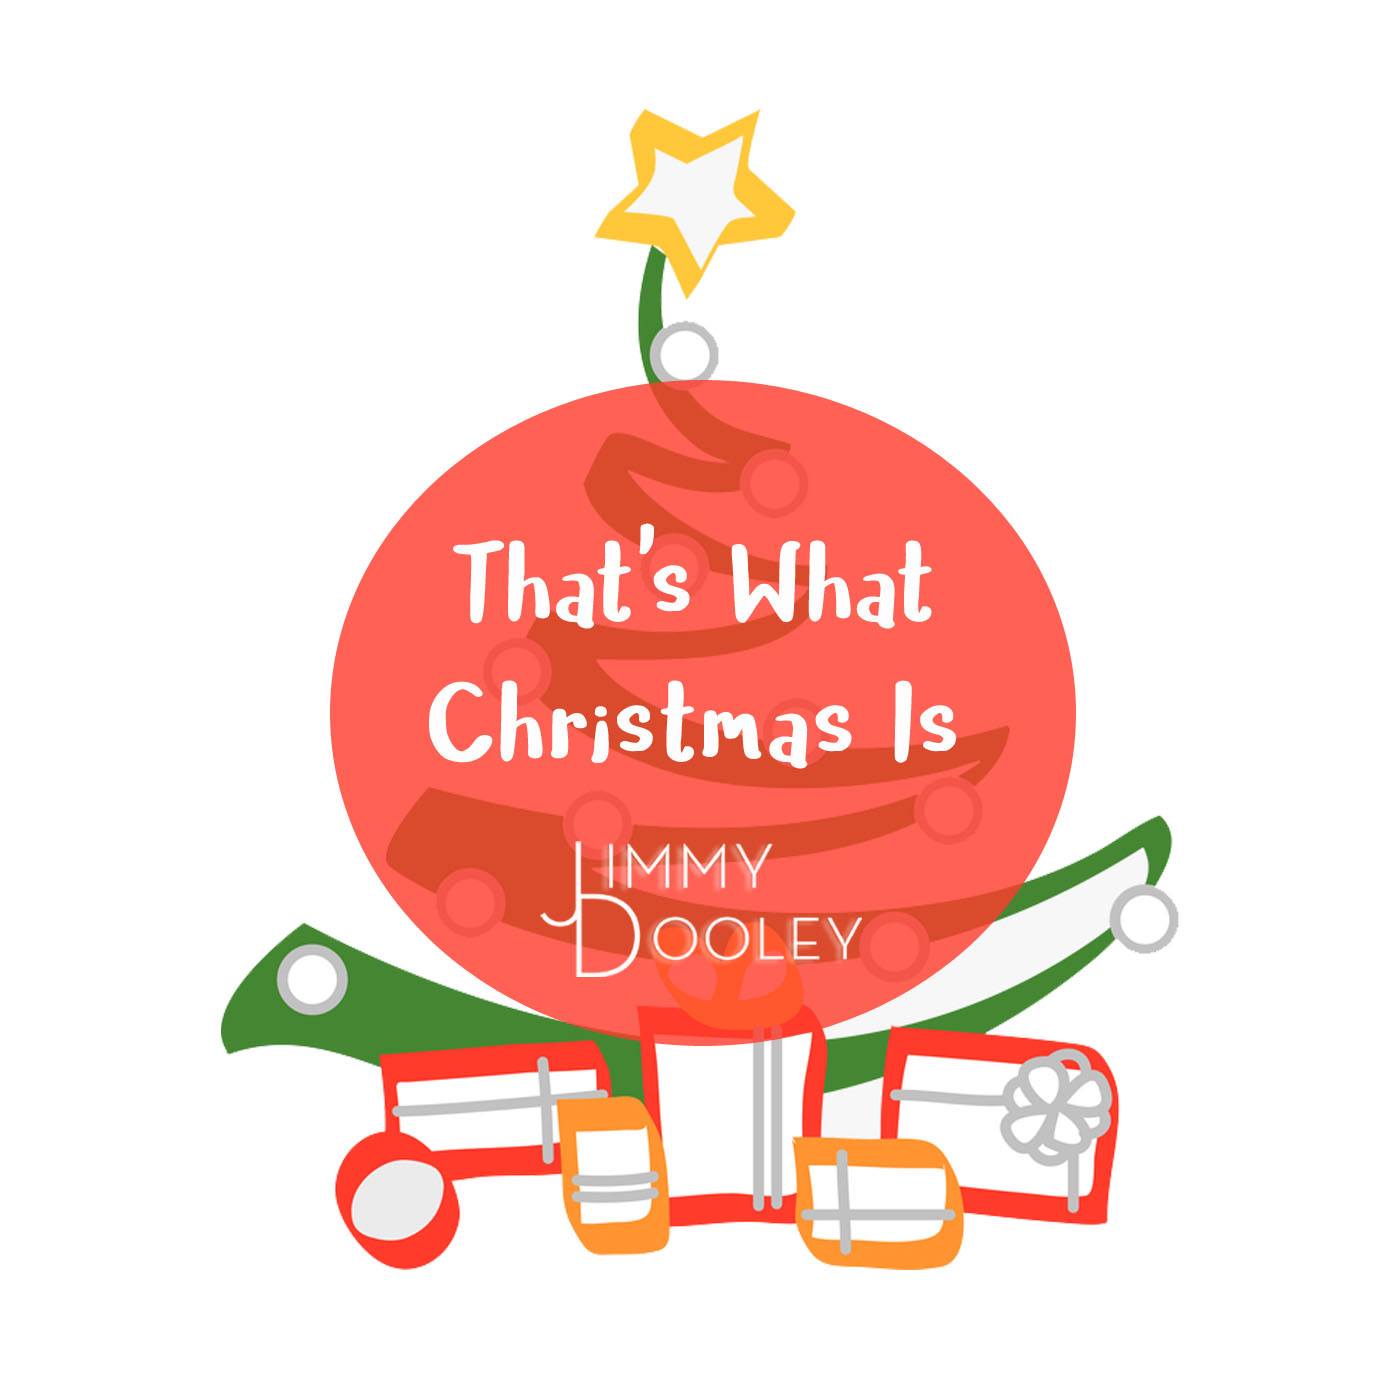 That's What Christmas Is - Jimmy Dooley